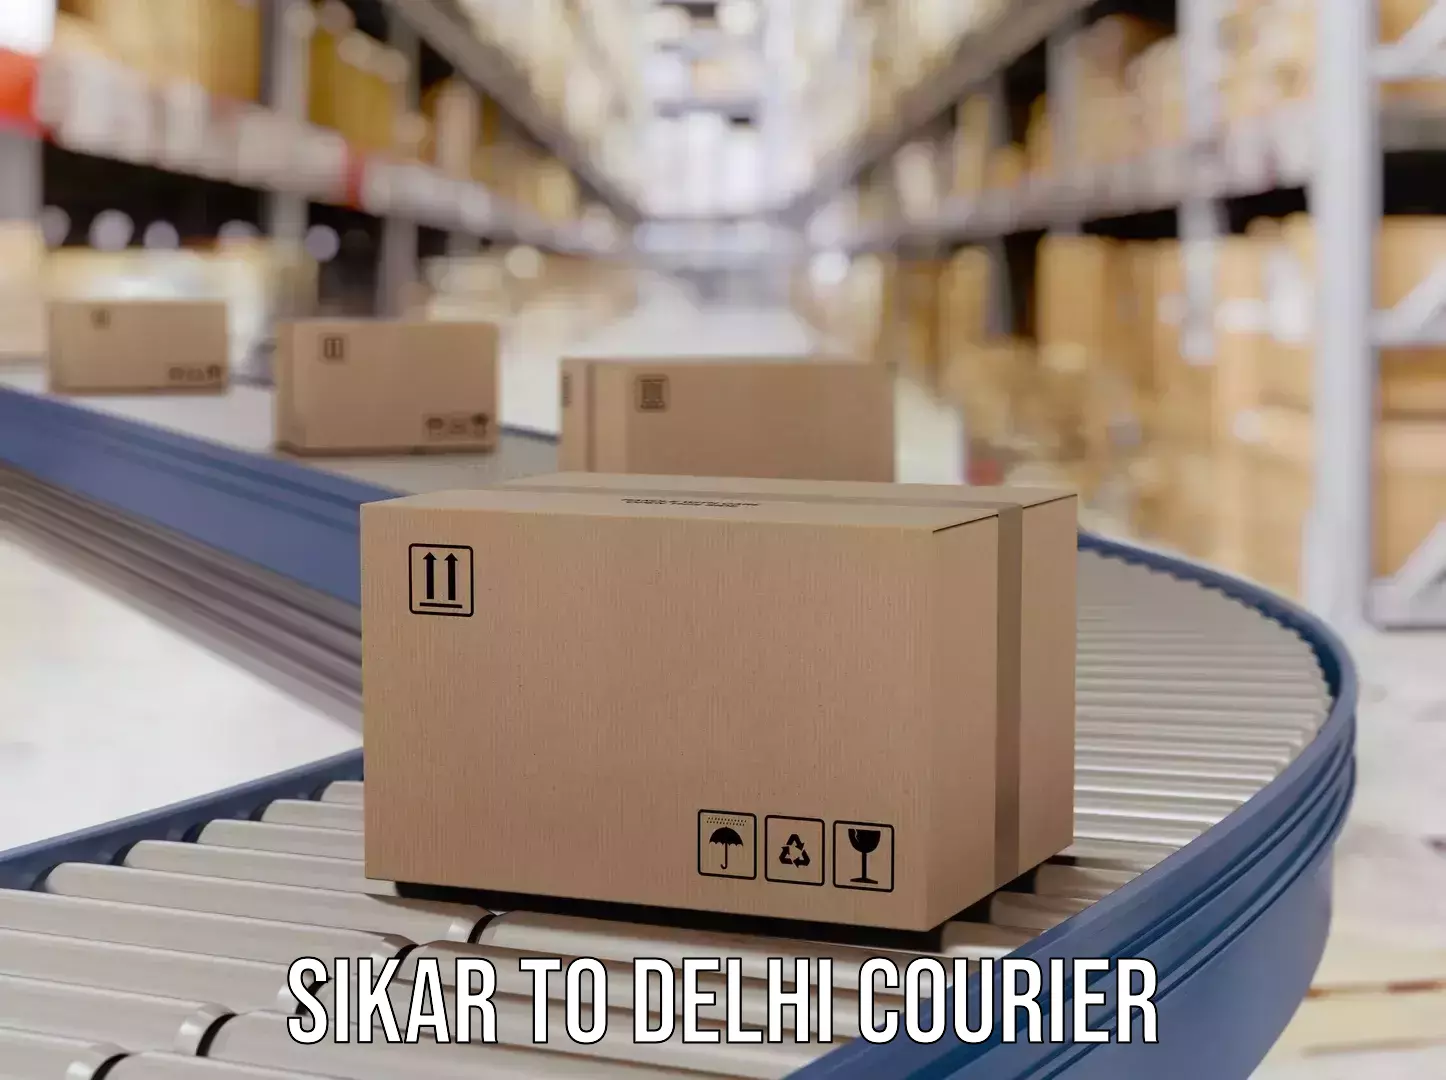 Supply chain delivery Sikar to Indraprastha